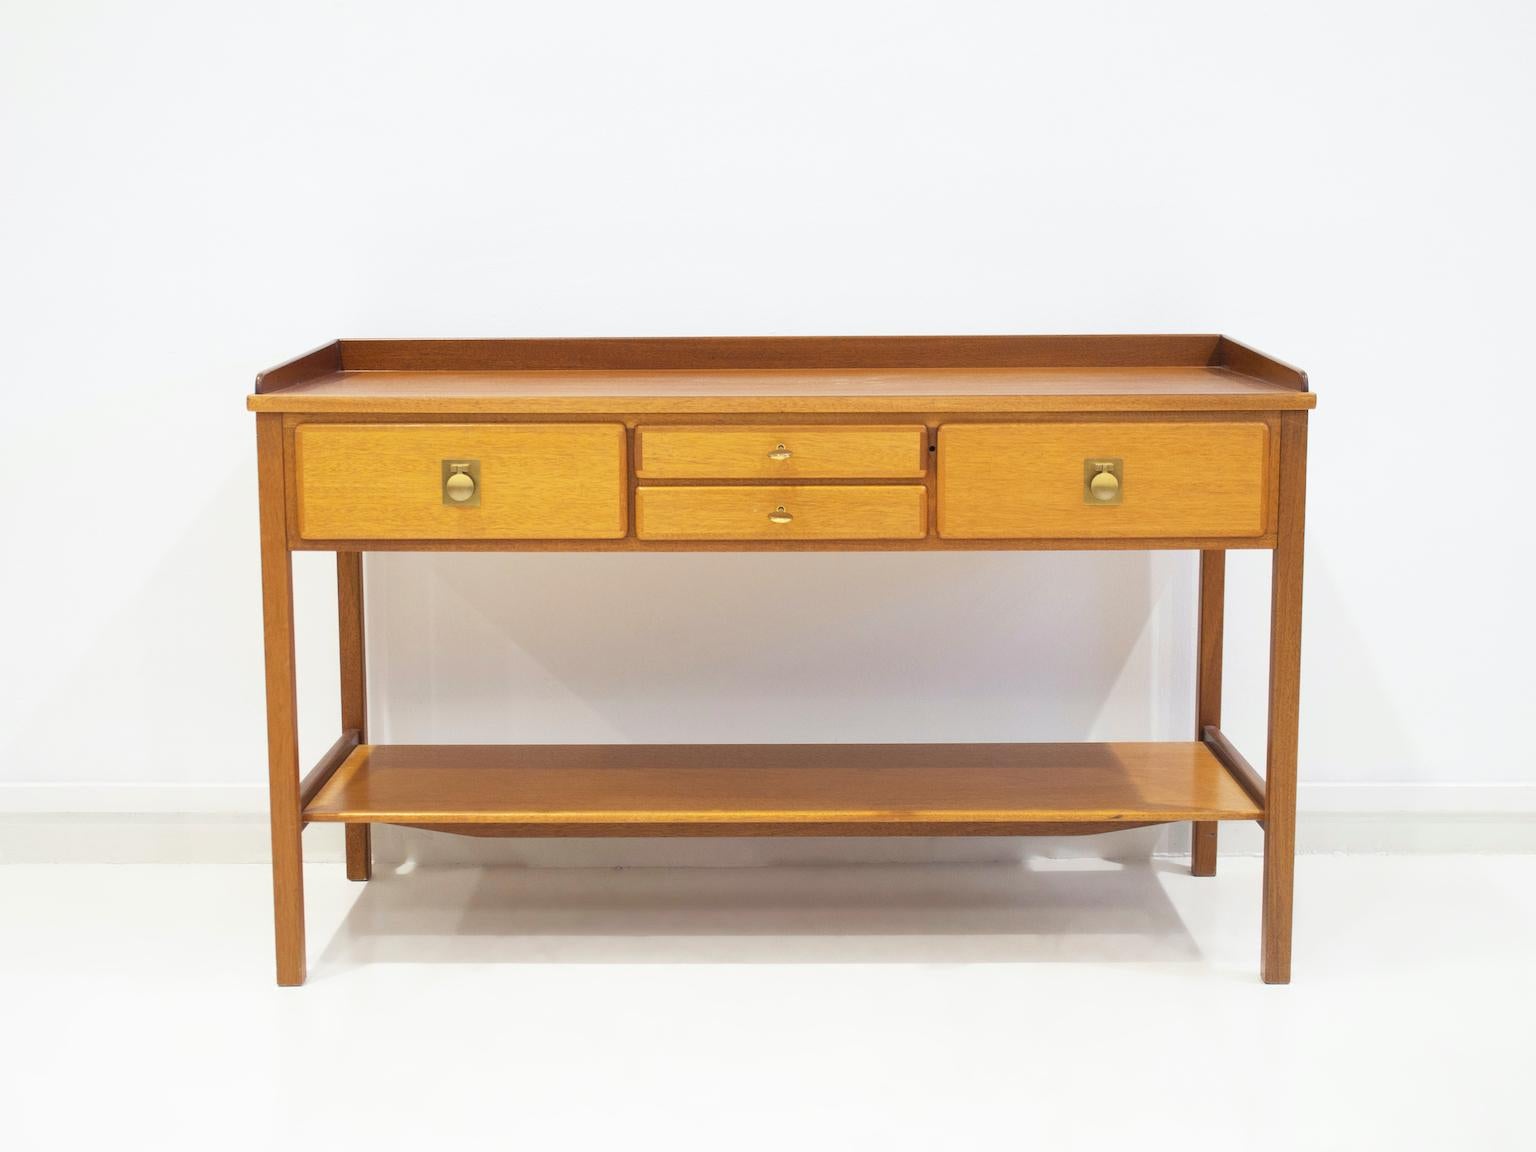 Mahogany console table or sideboard manufactured by Nordiska Kompaniet, circa 1960's. Elegant piece with four drawers, brass fittings and top with slightly raised edge. Keys included.

No Cites needed.